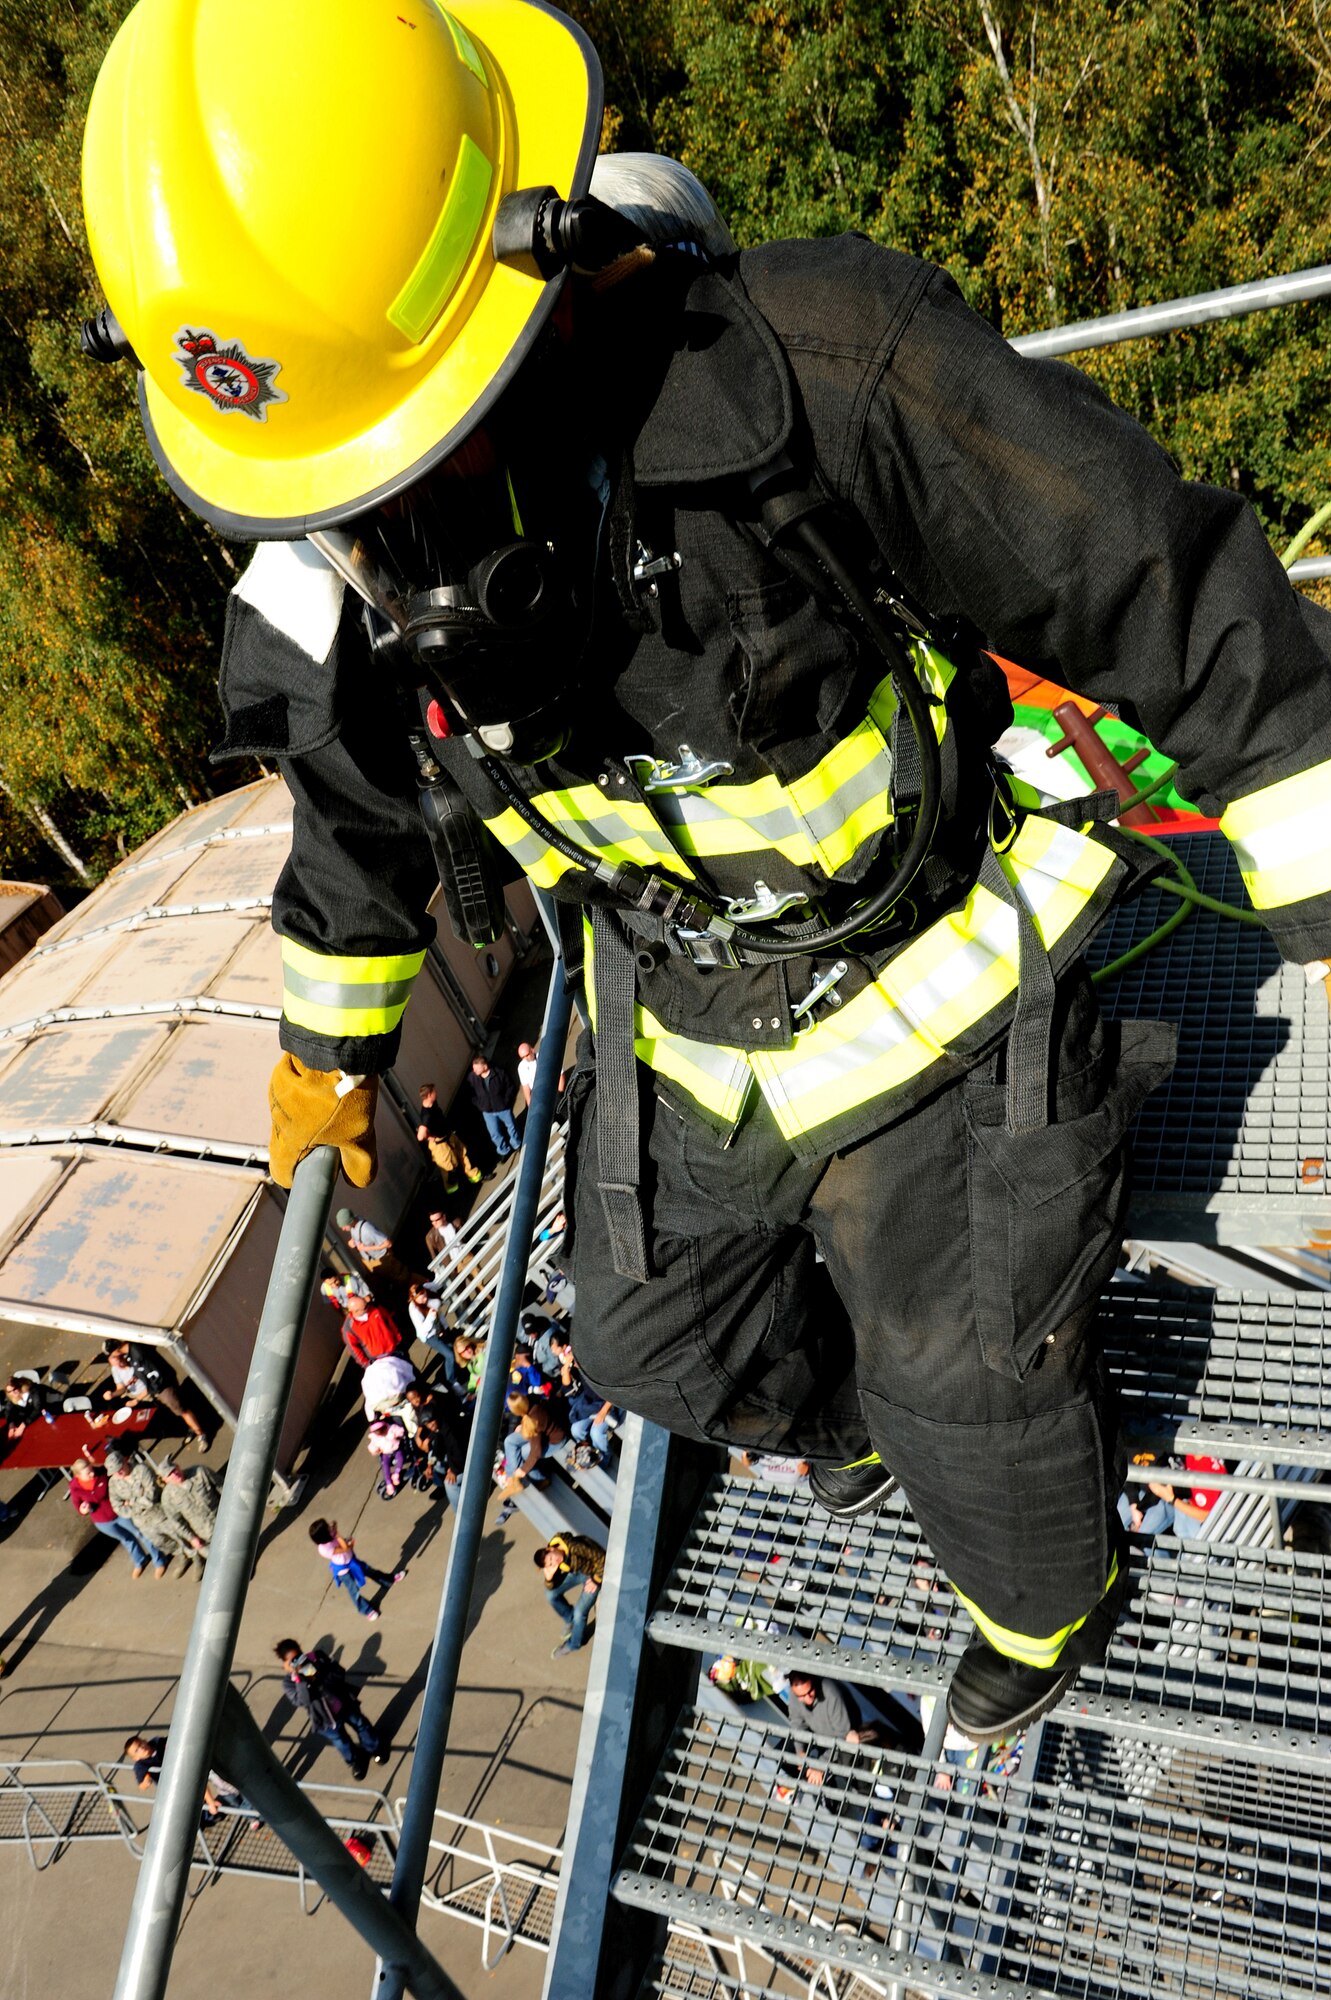 A U.S. Air Forces in Europe firefighter participates in a Firefighter Combat Challenge at the 435th Construction and Training Squadron contingency training site, Ramstein Air Base, Germany, Oct. 9, 2010. The competition consisted of a timed, five part obstacle course simulating real life challenges. (U.S. Air Force photo by Airman 1st Class Brea Miller)